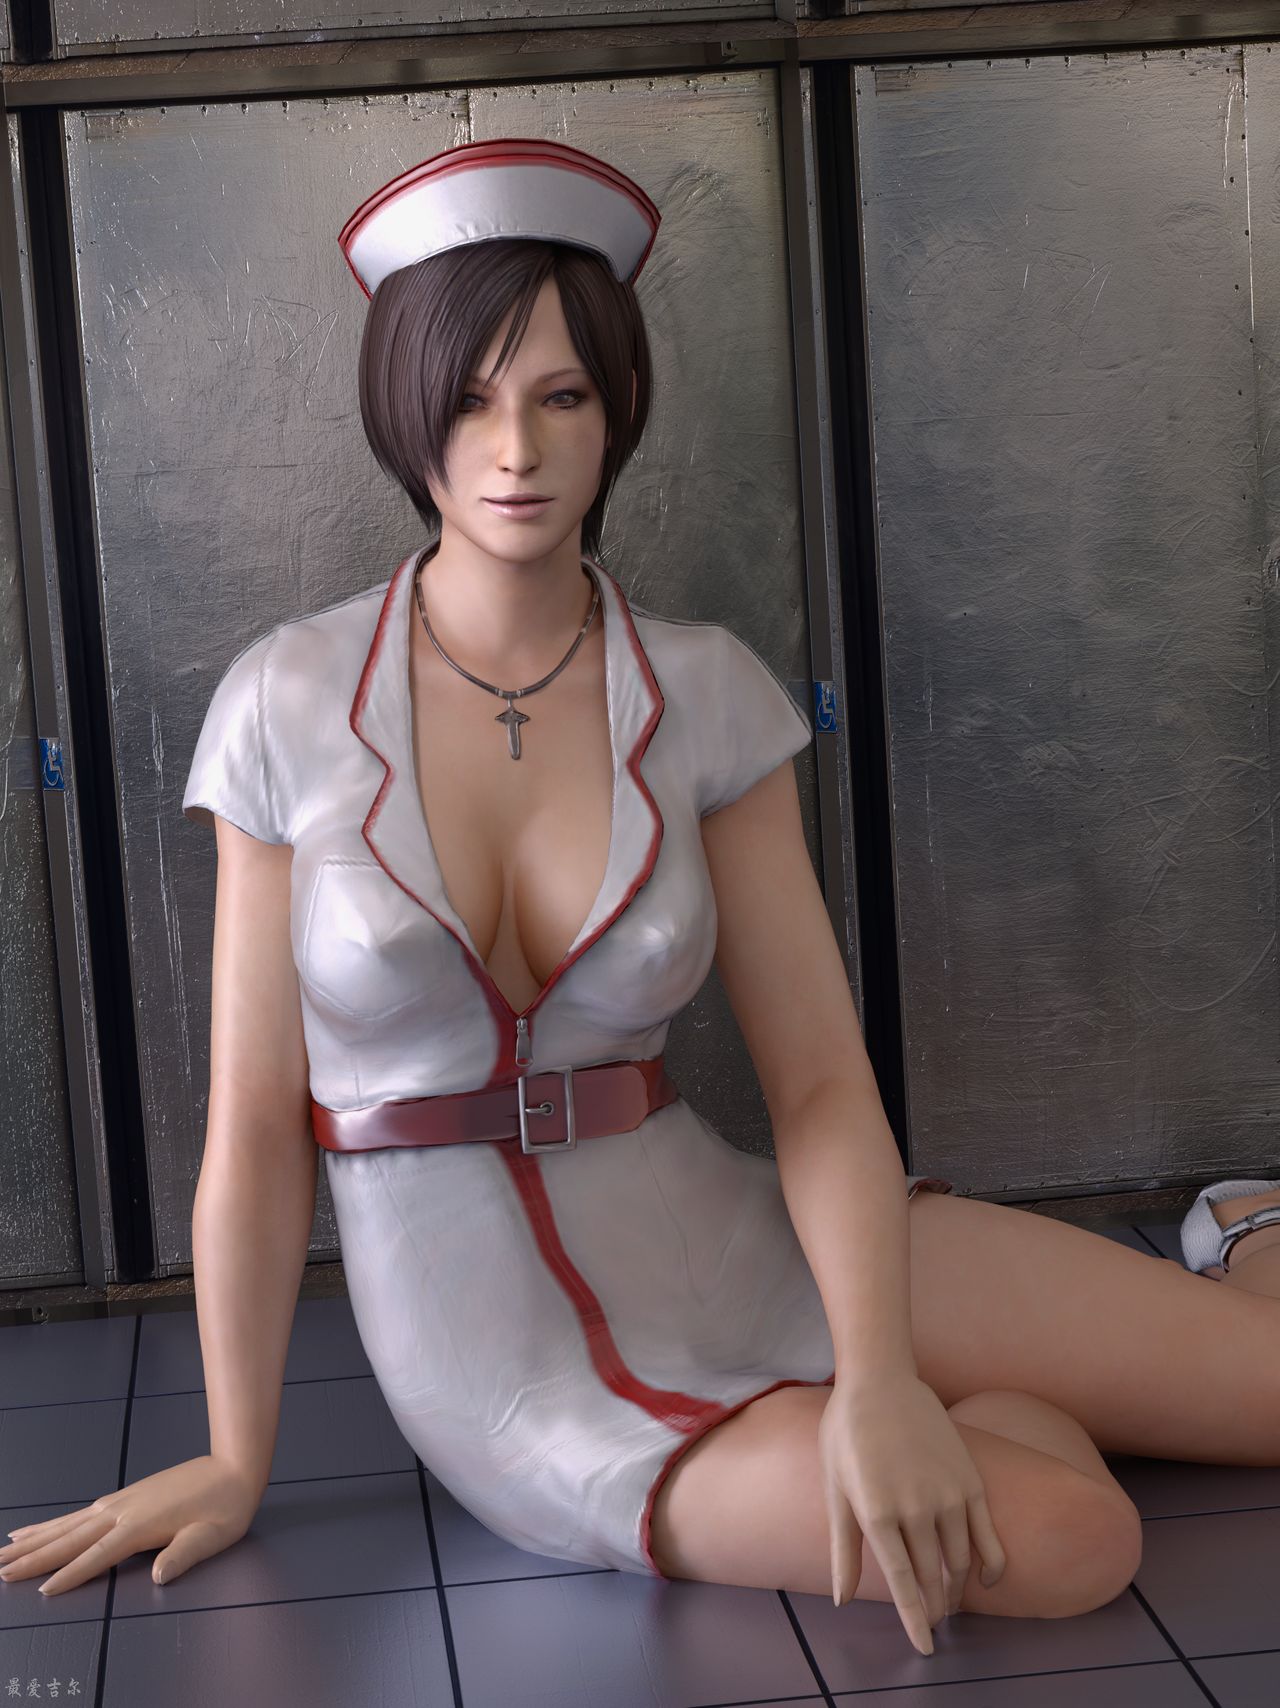 General 1280x1708 Ada Wong cosplay Resident Evil Resident Evil 4 Resident Evil 6 video game art video game characters video game girls Video Game Horror